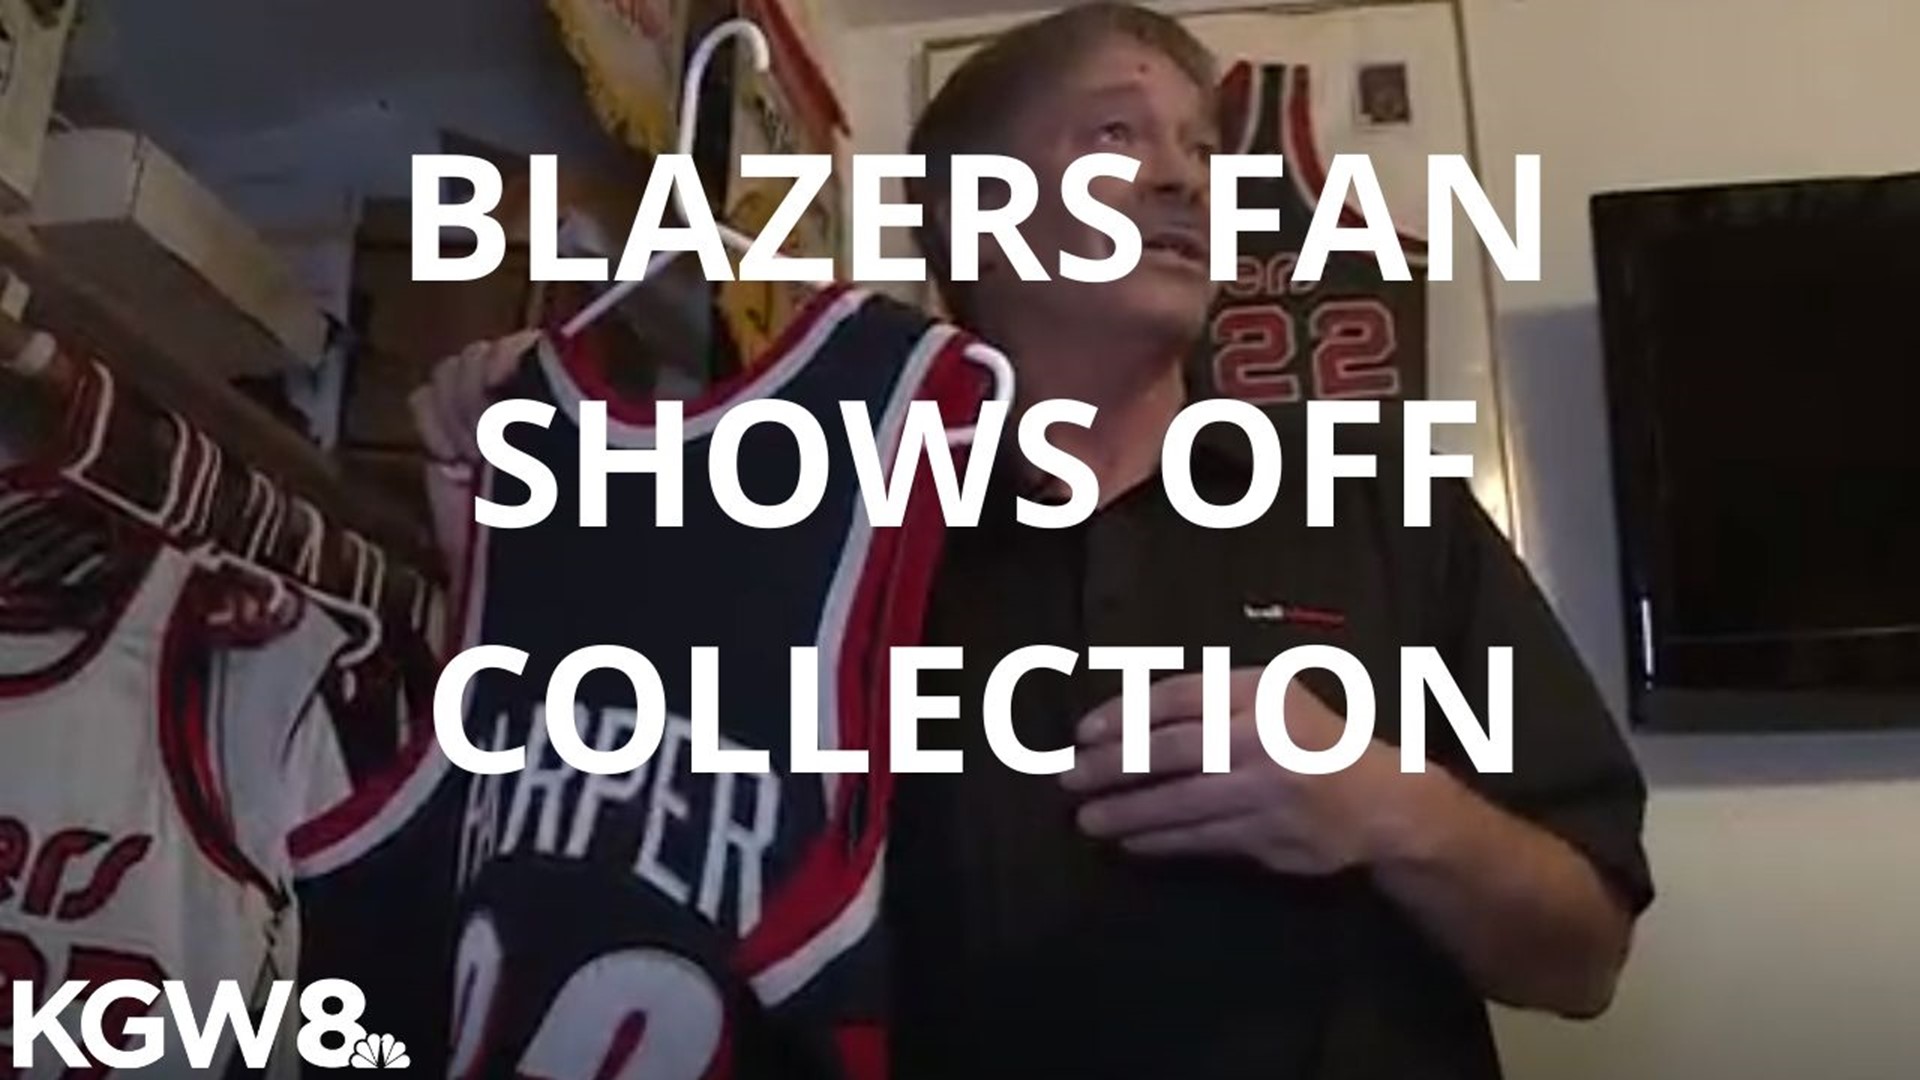 Steve Davies has vintage jerseys, T-shirts, autographs and more spanning decades.